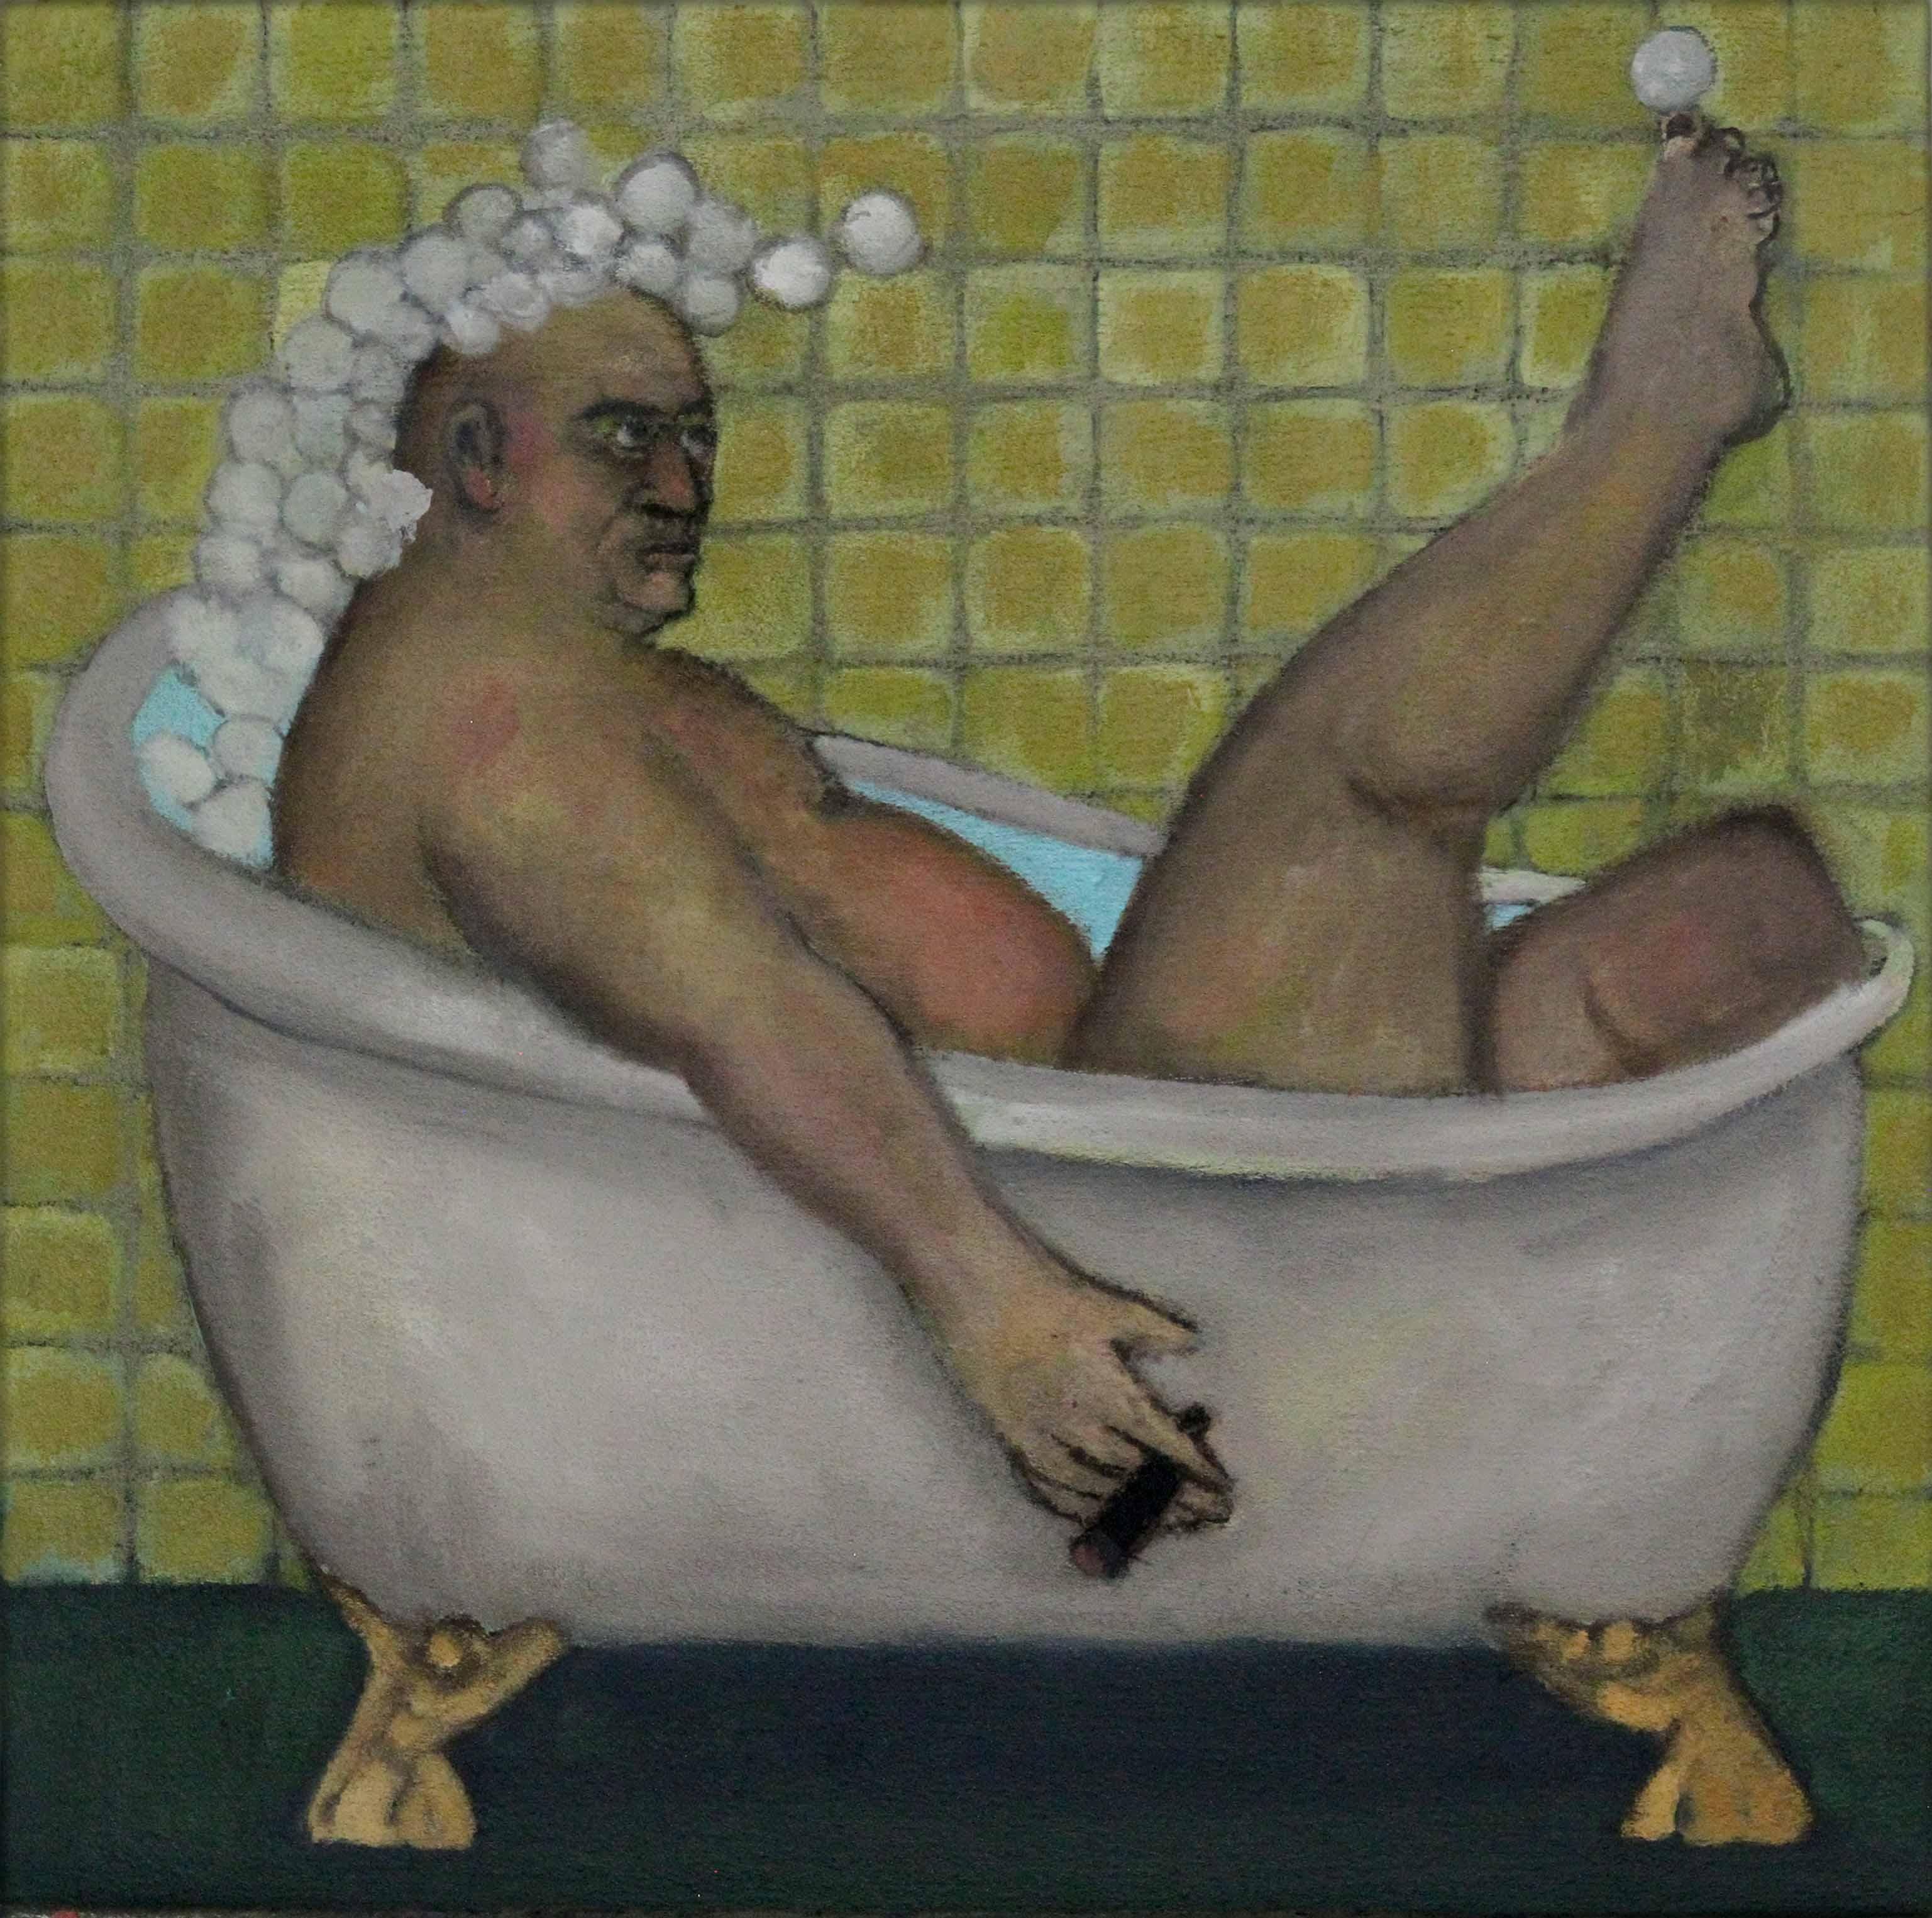 Stephen Basso Figurative Painting - The One That Got Away.  Smoking man in antique bathtub soft green tones humorous